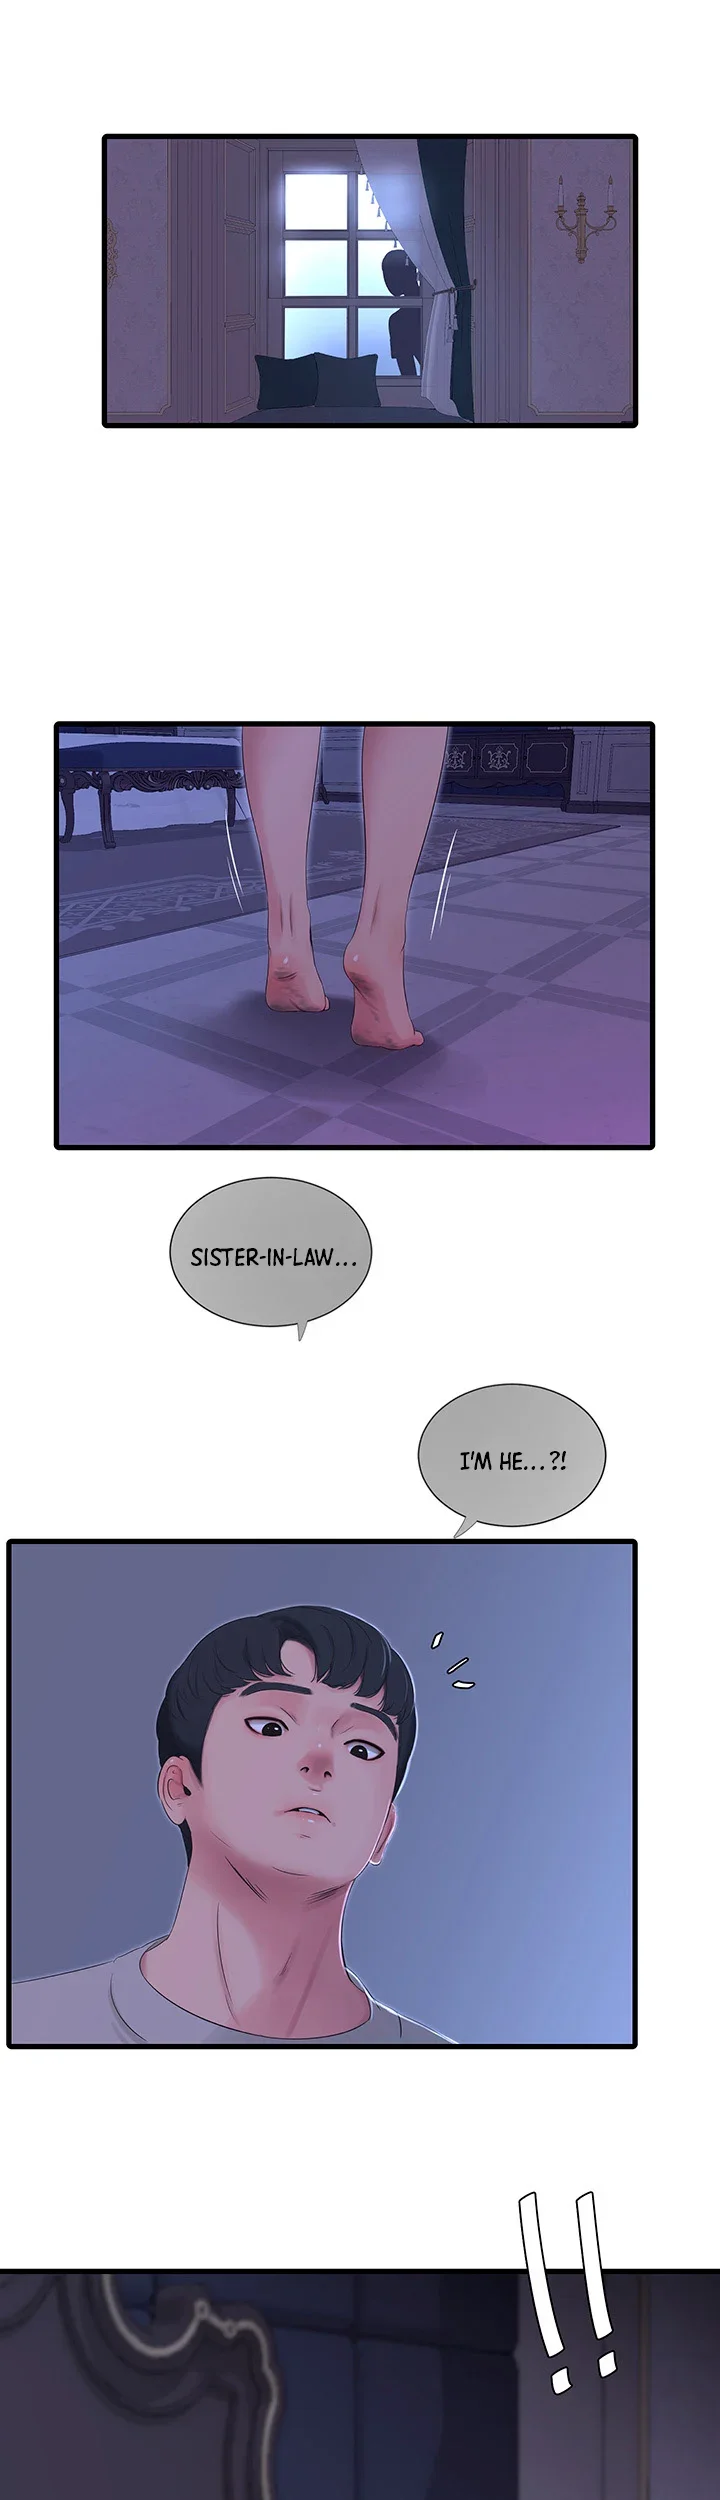 maidens-in-law-chap-33-2